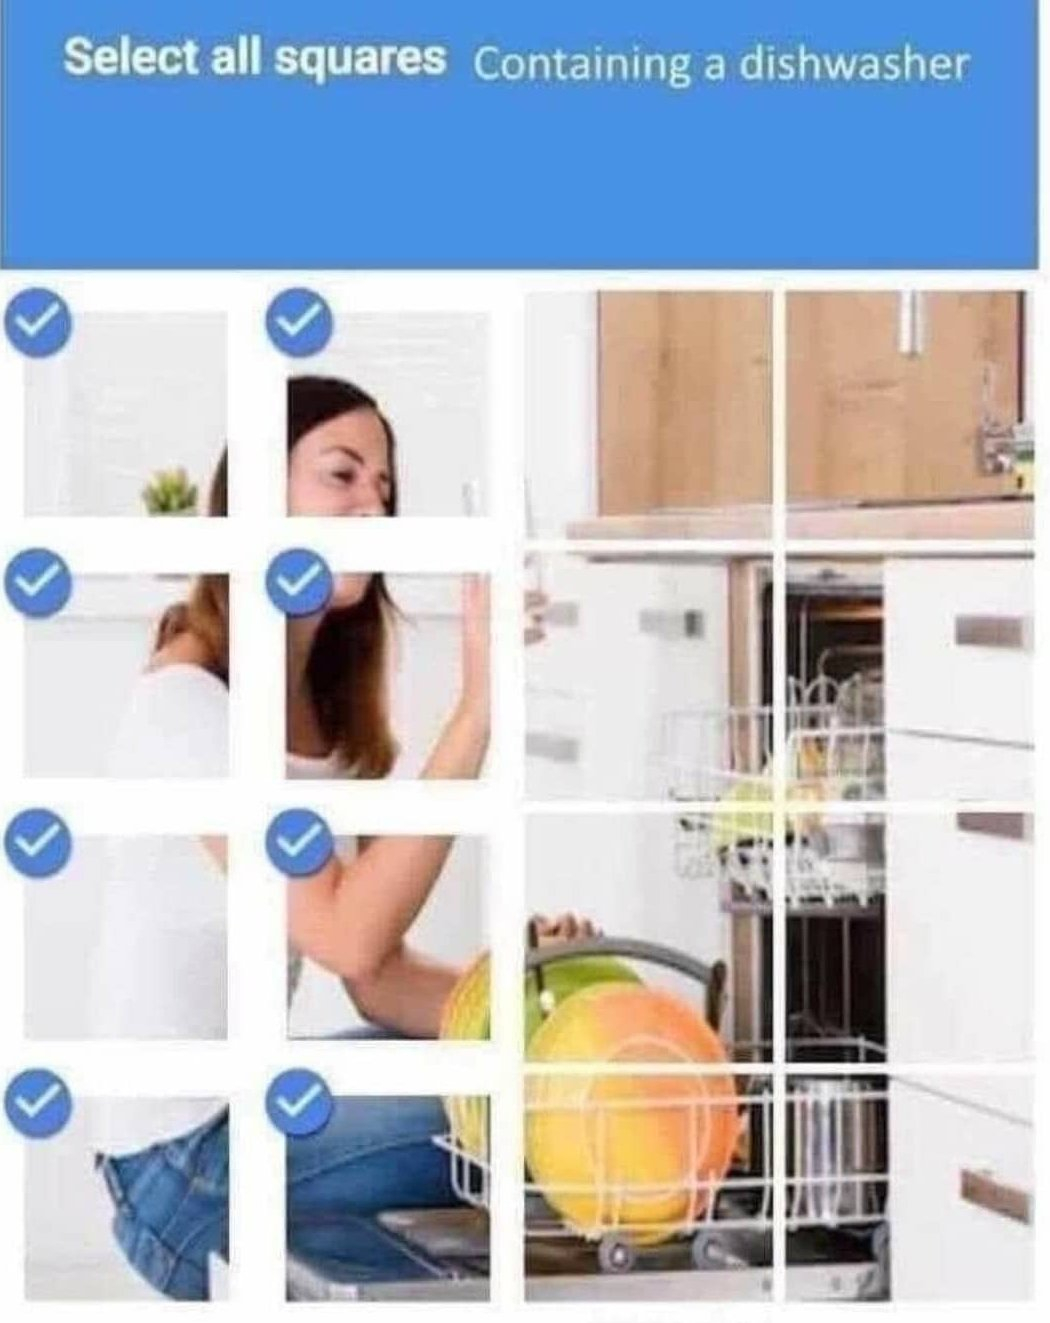 Select all squares containing a dishwasher woman